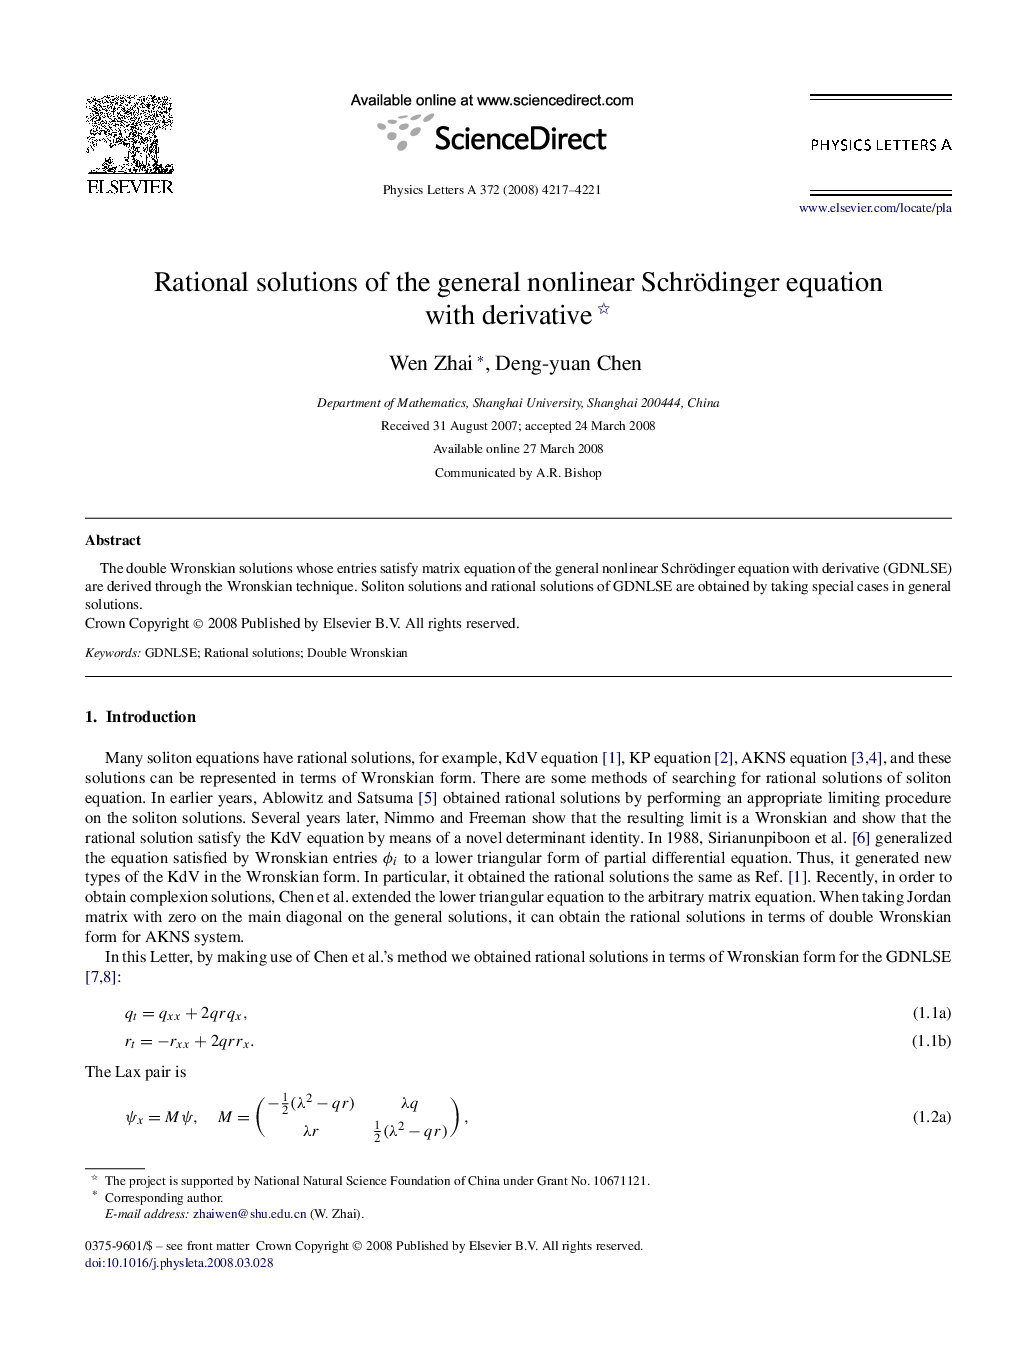 Rational solutions of the general nonlinear Schrödinger equation with derivative